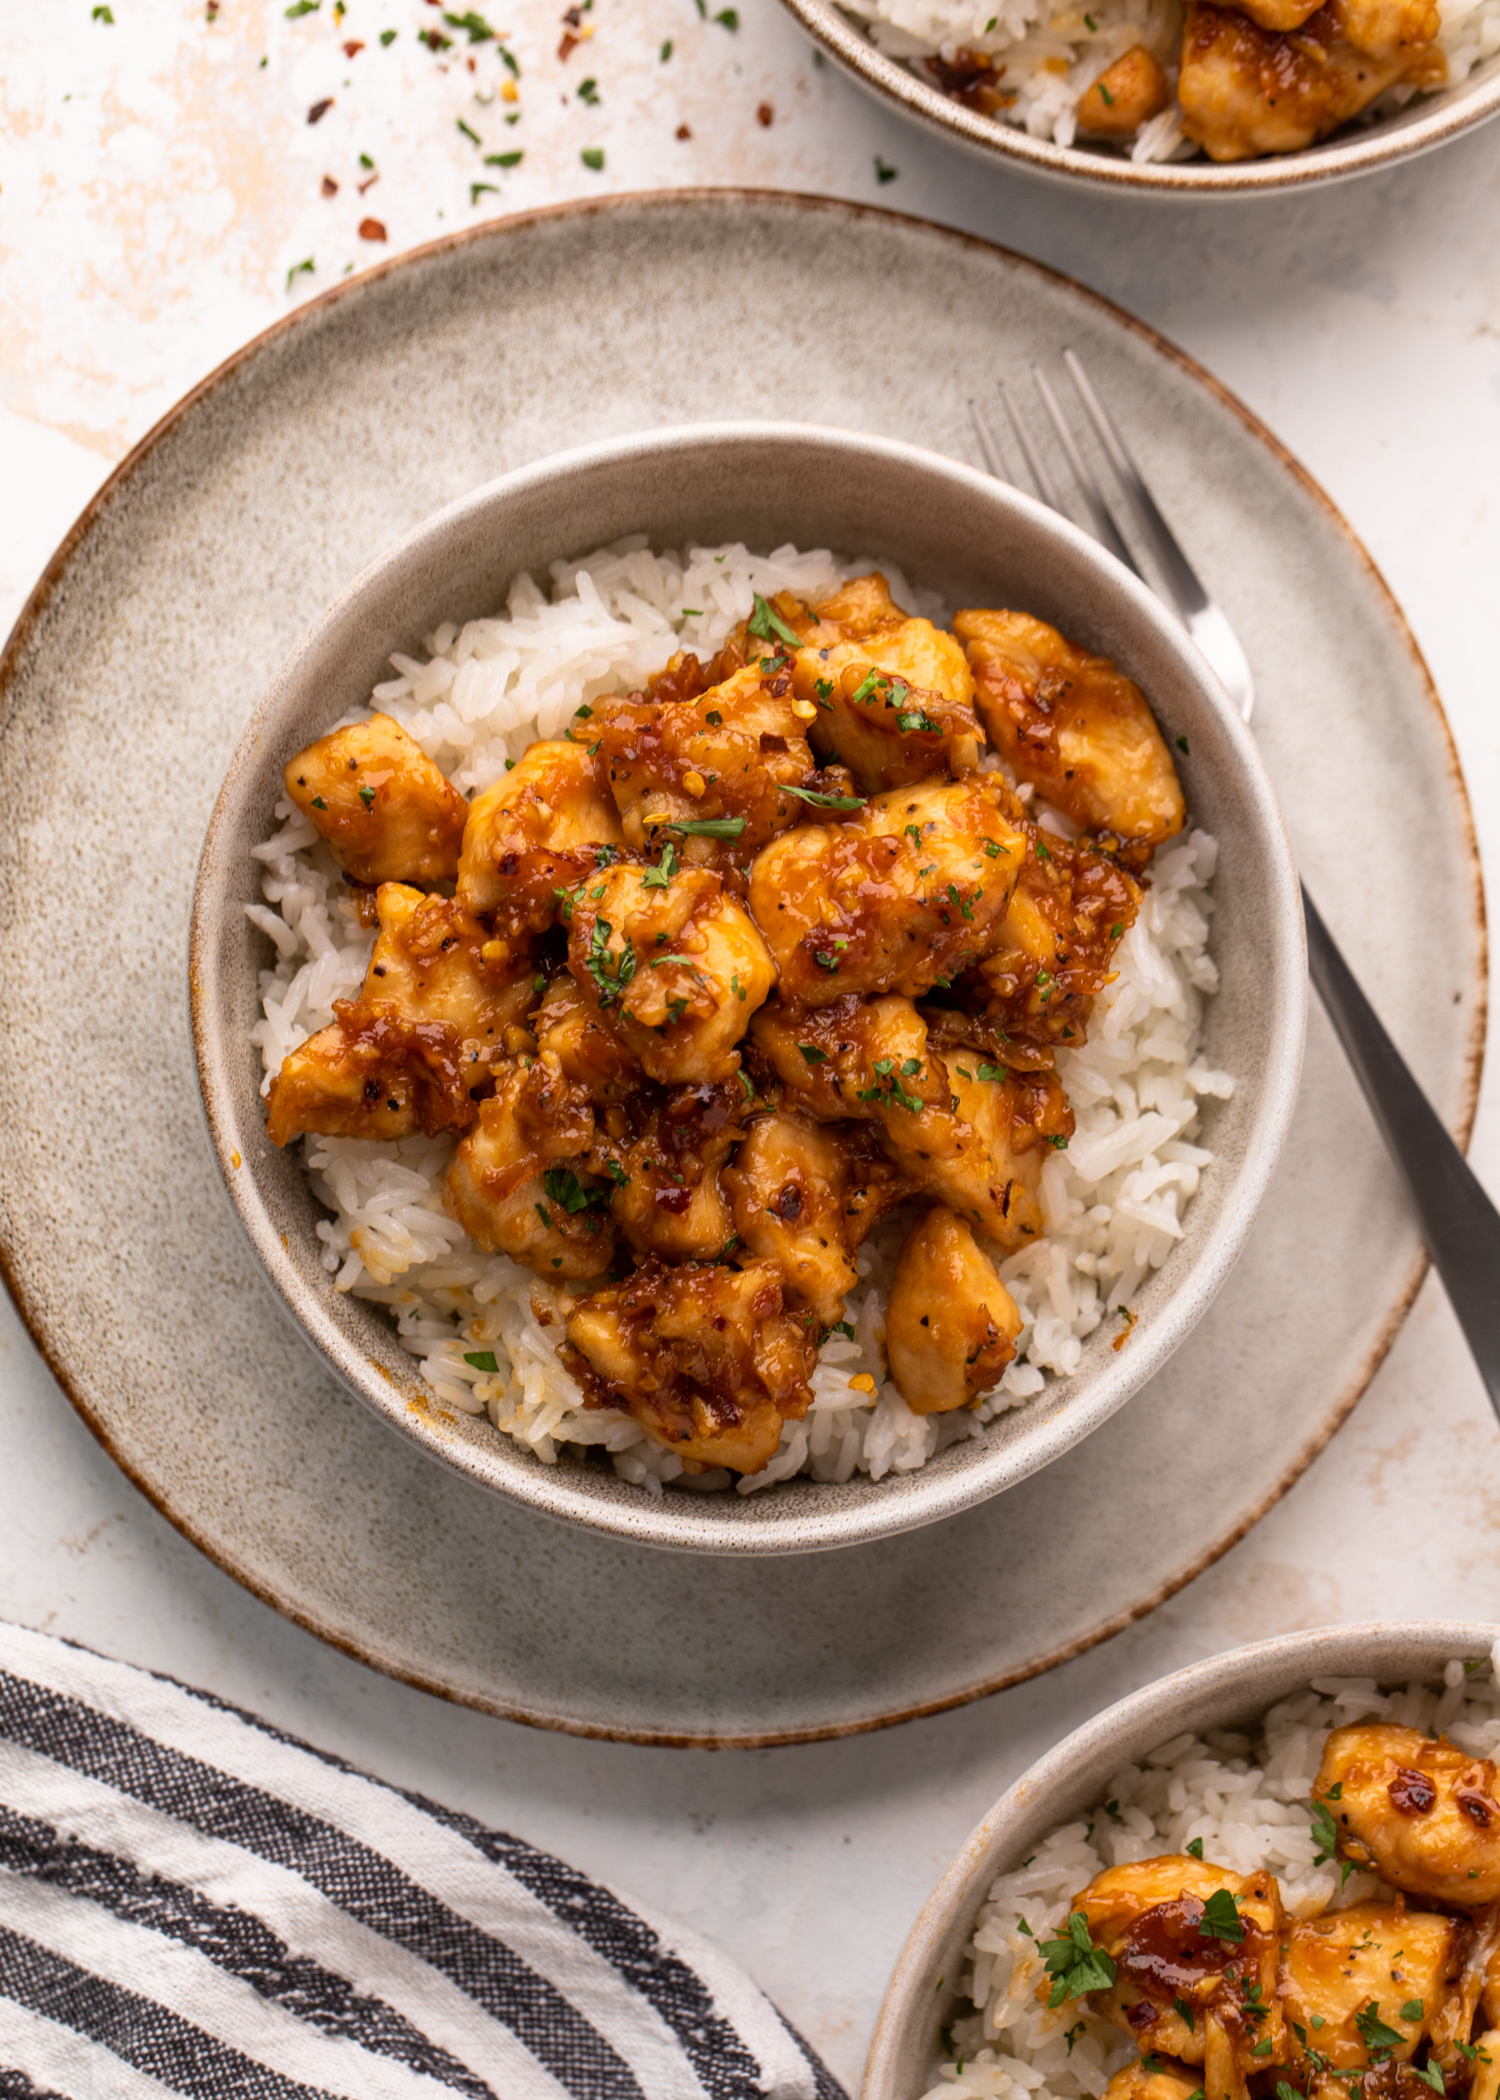 Chicken bites in a sticky sauce over white rice.